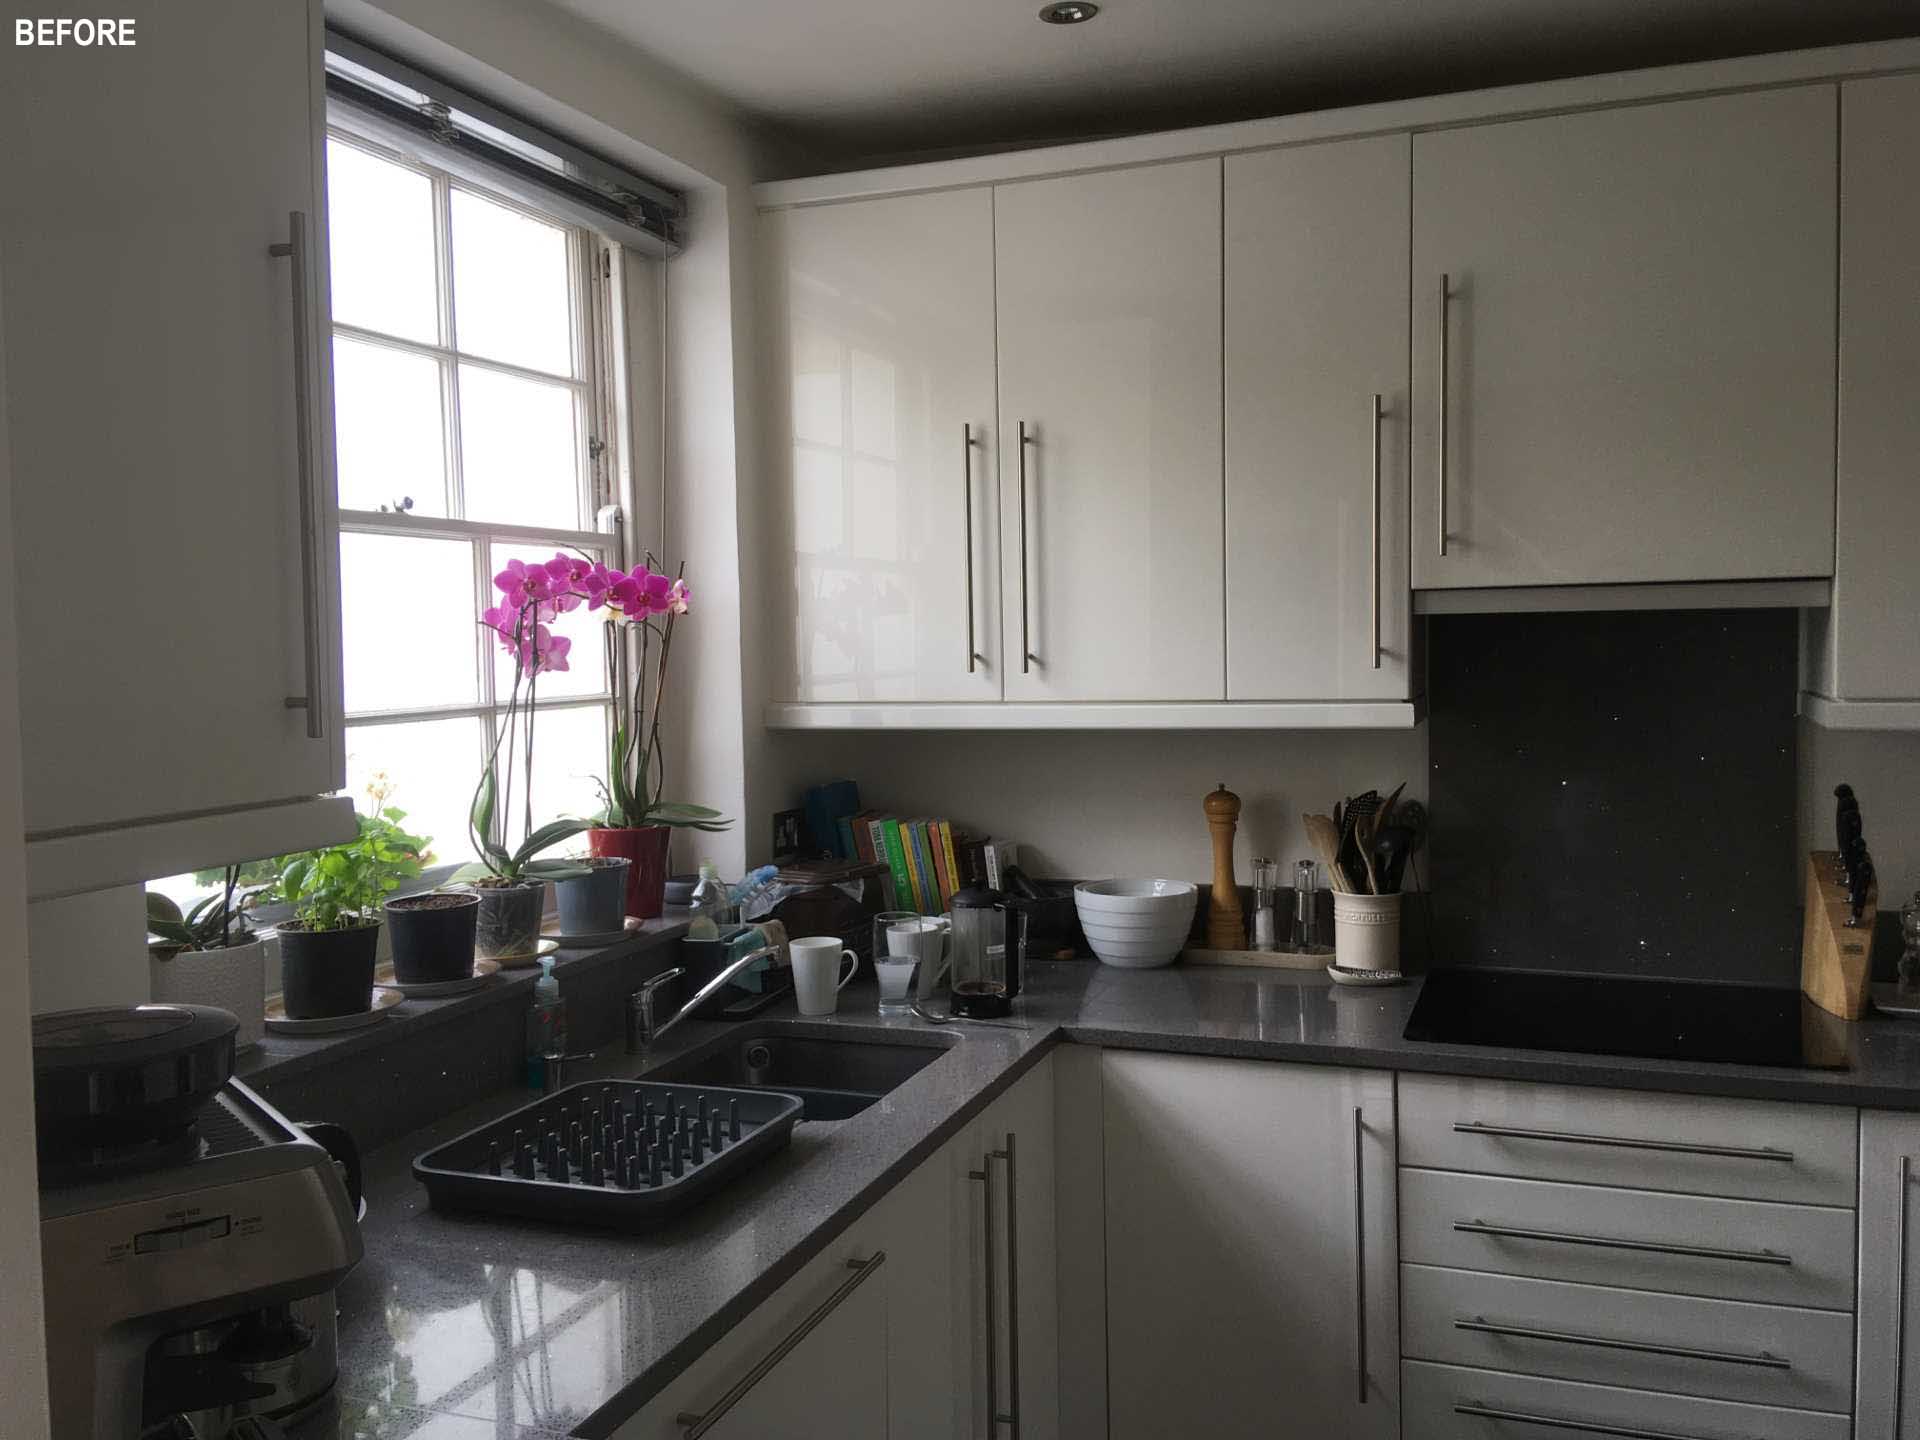 BEFORE - a small white kitchen.